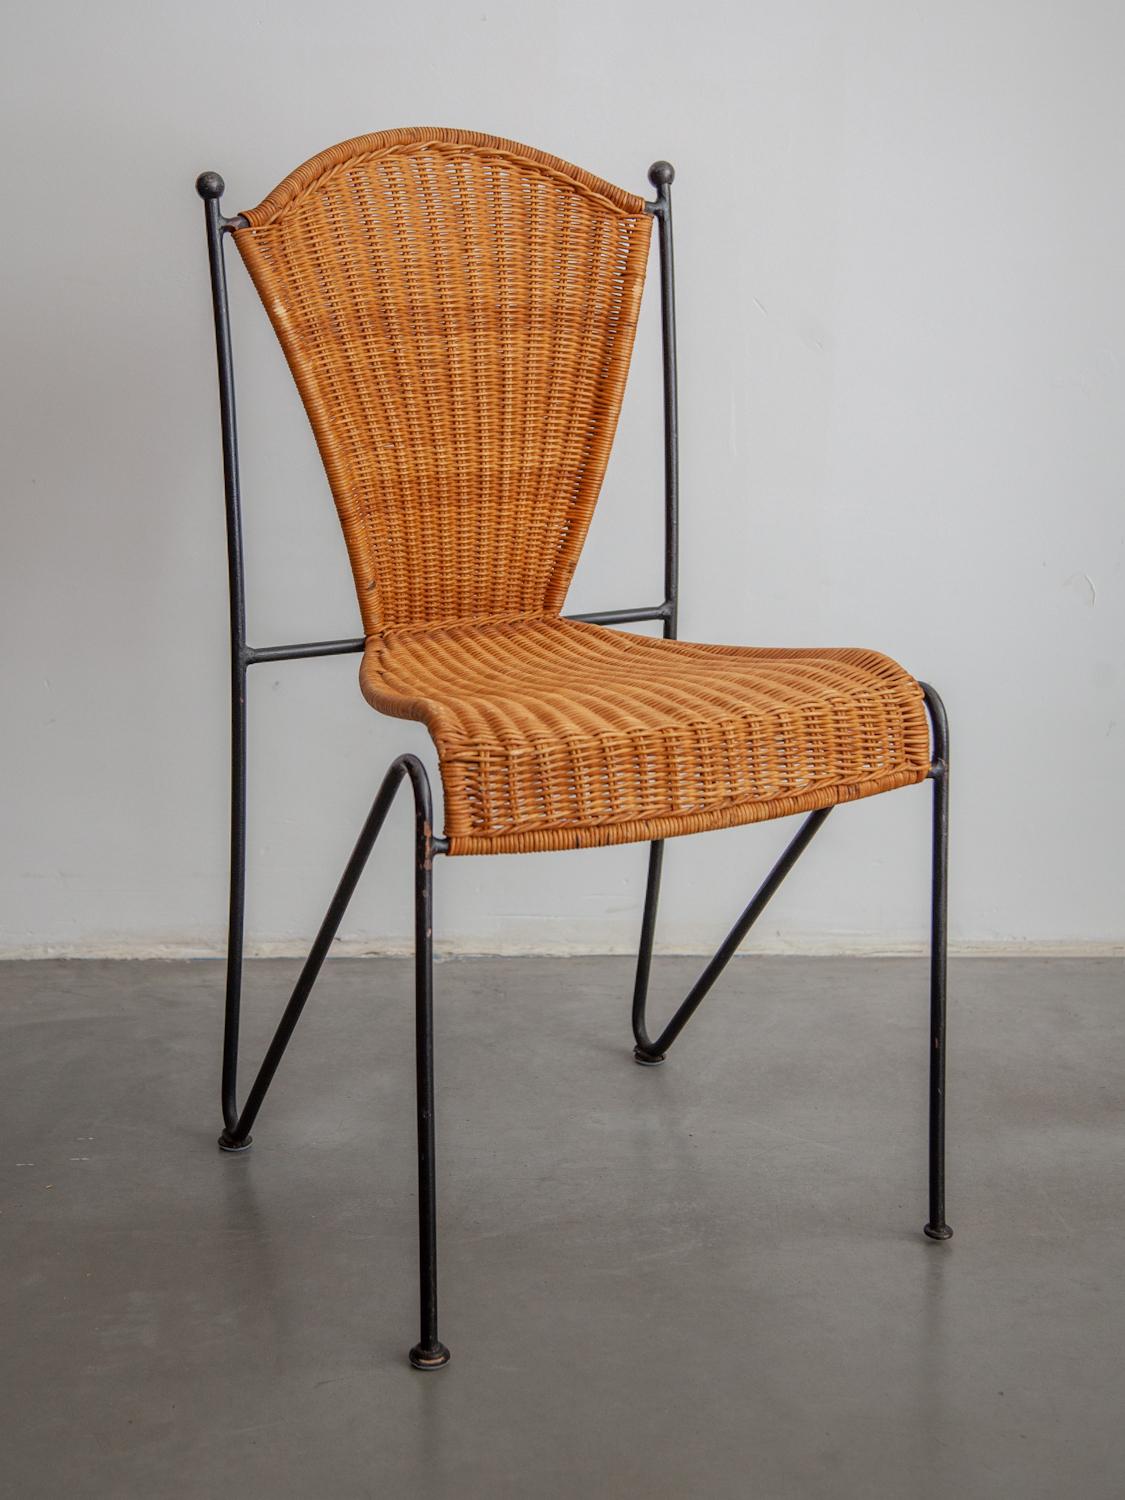 European Six Iron and Rattan Indoor and Outdoor Patio Chairs by Pipsan Saarinen Swanson